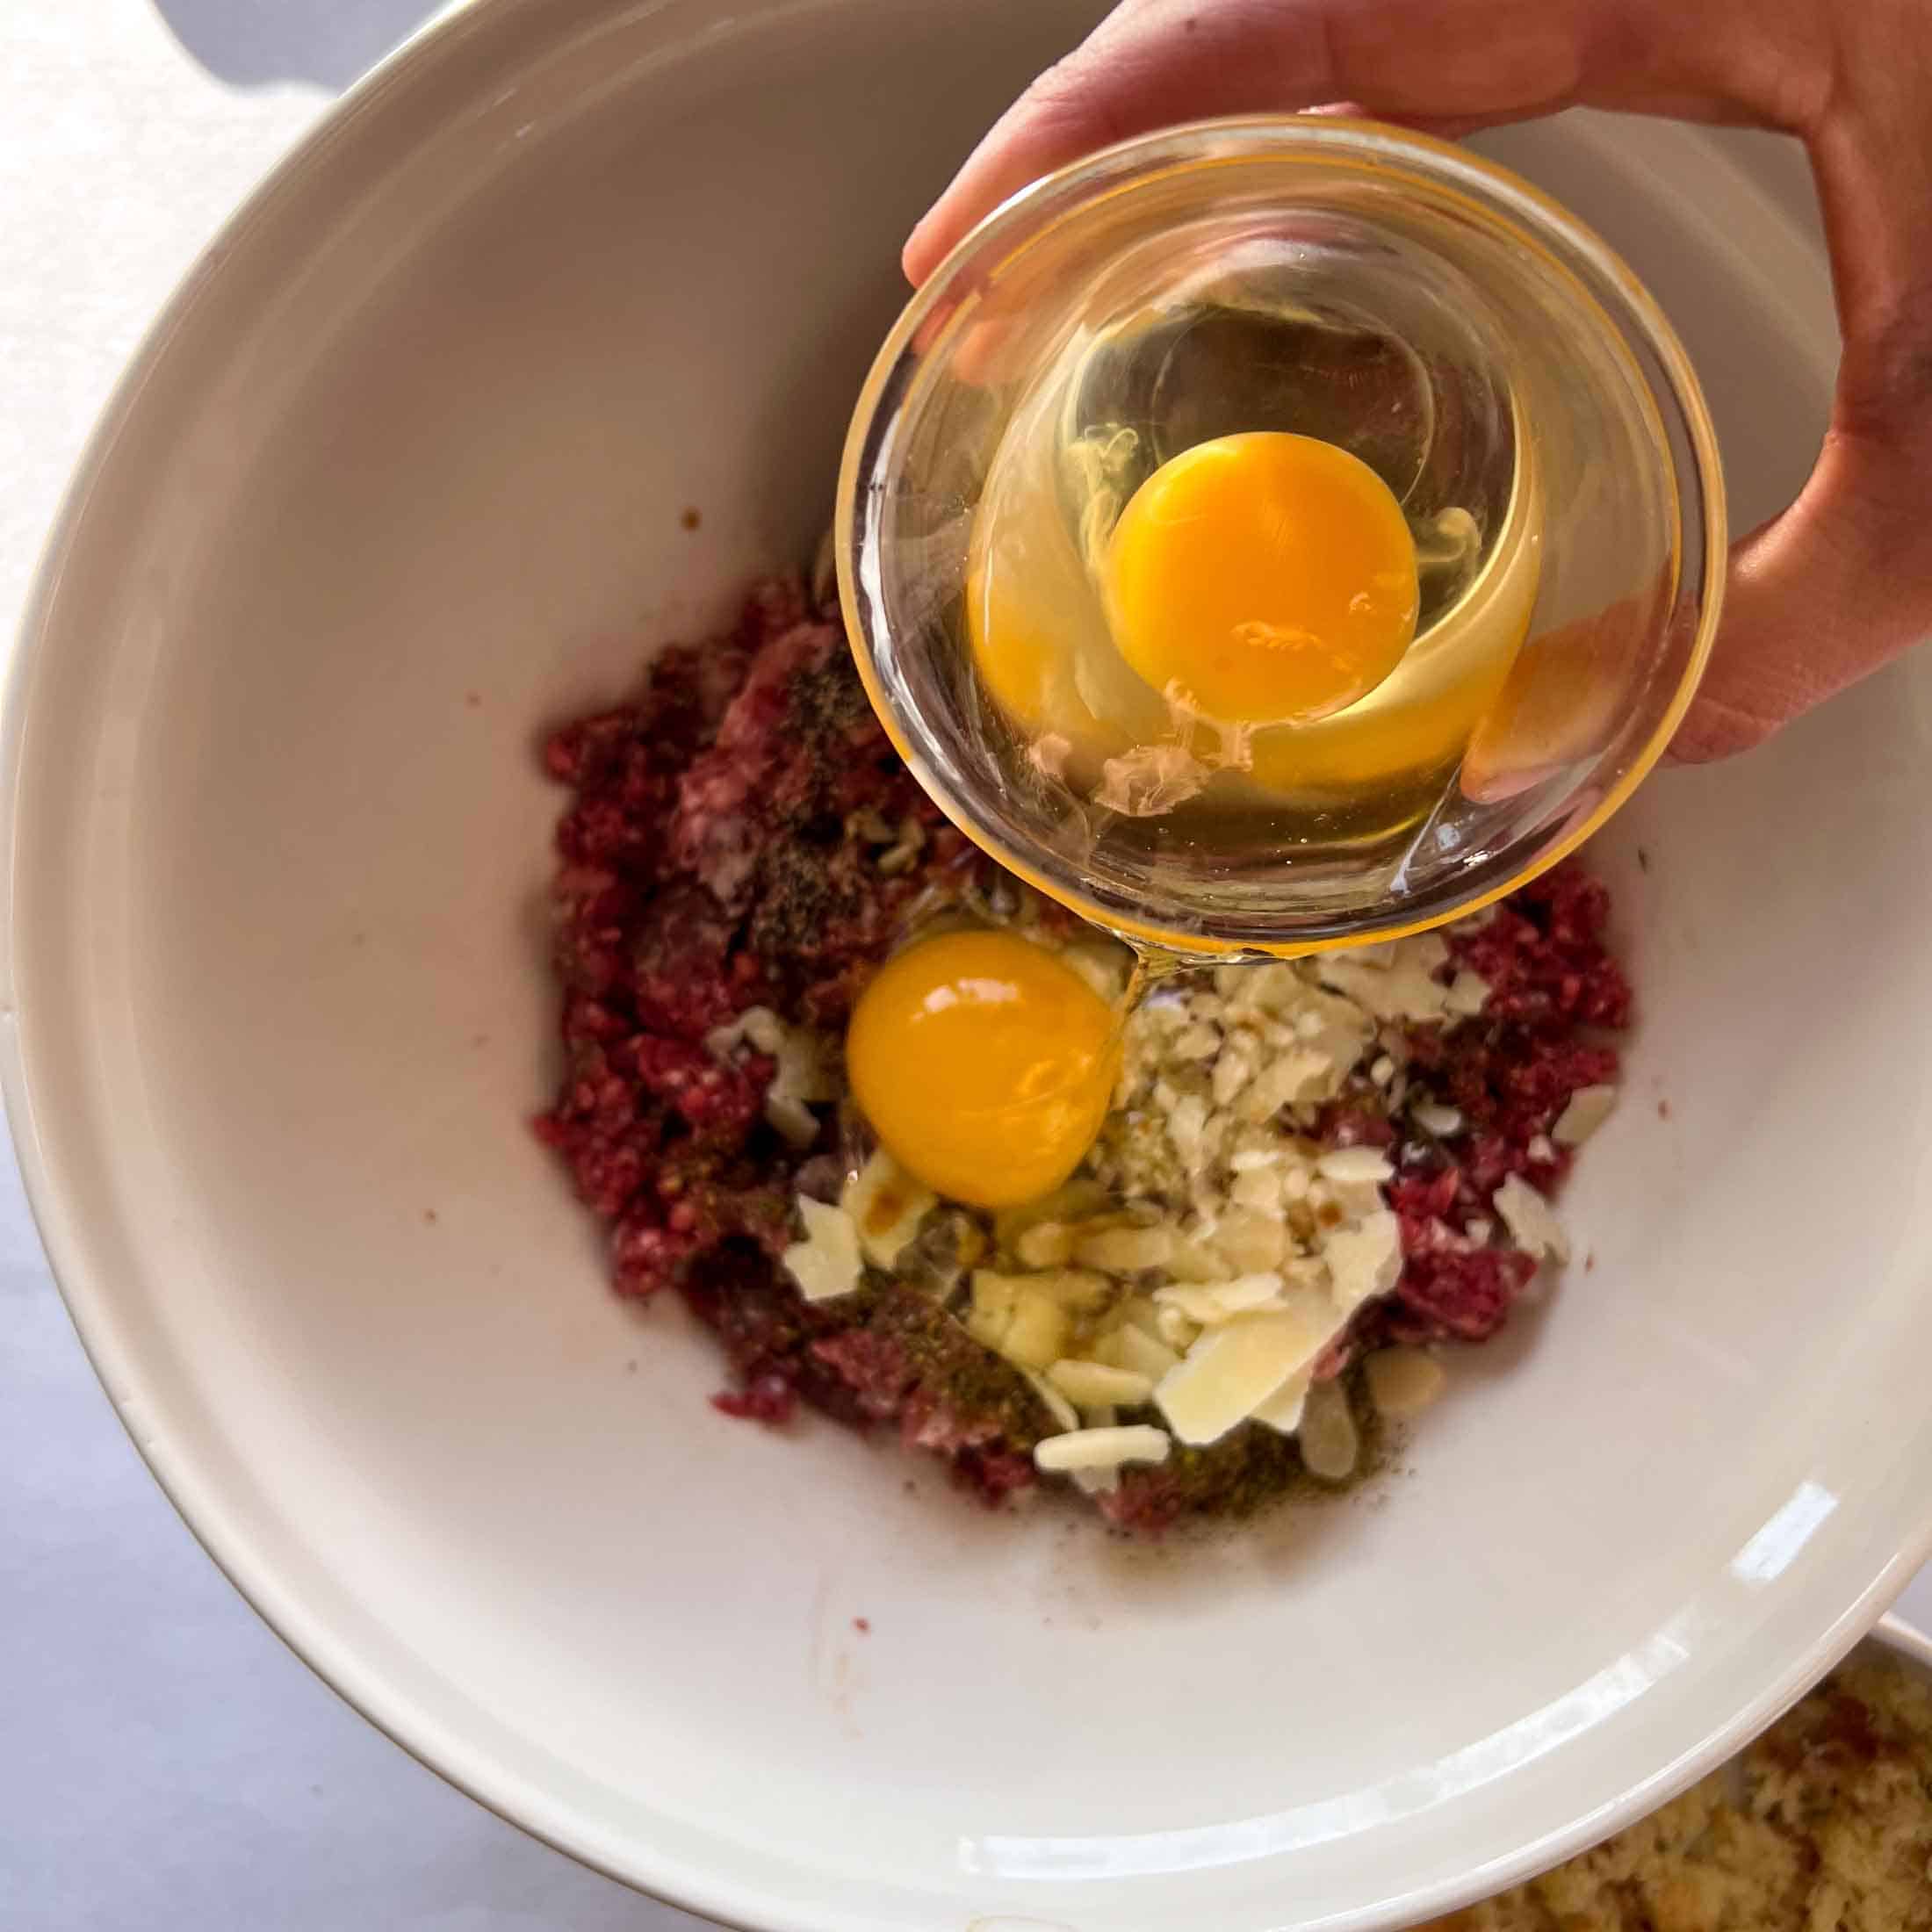 Two eggs being dumped into a cream bowl filled with raw venison, raw pork, and seasonings.